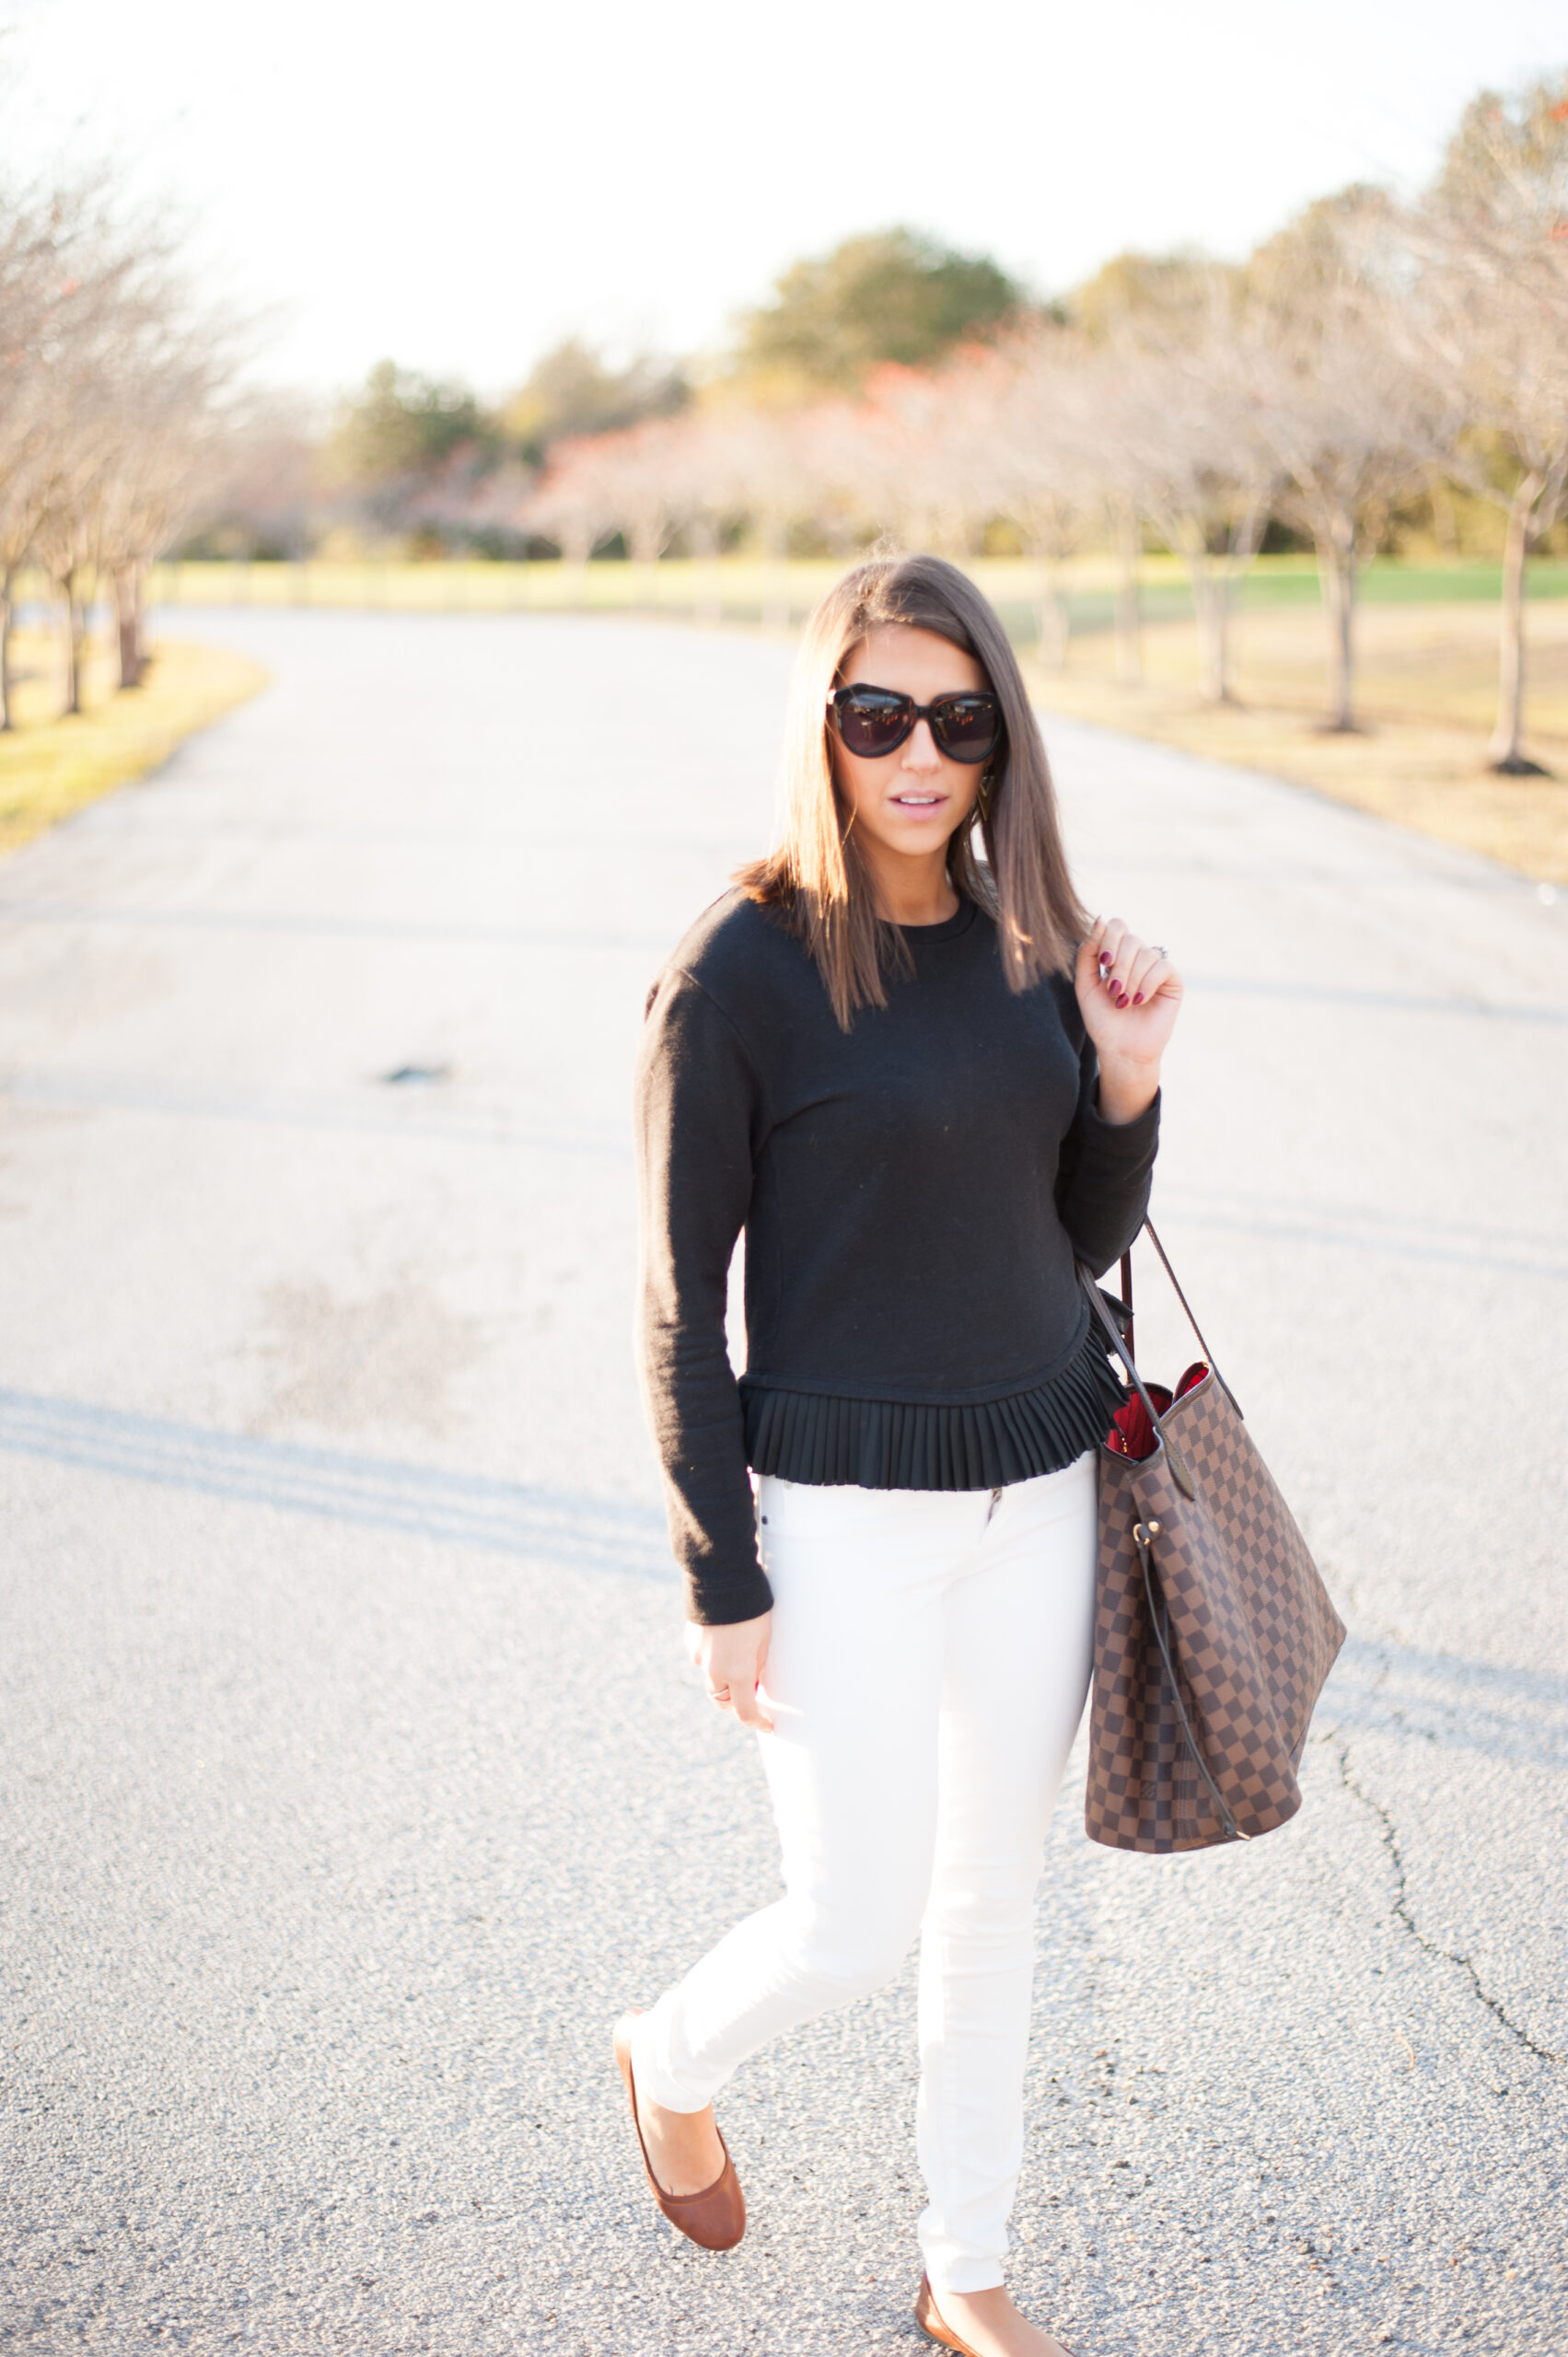 dress_up_buttercup_dede_raad_fashion_blogger_houston (7 of 8)